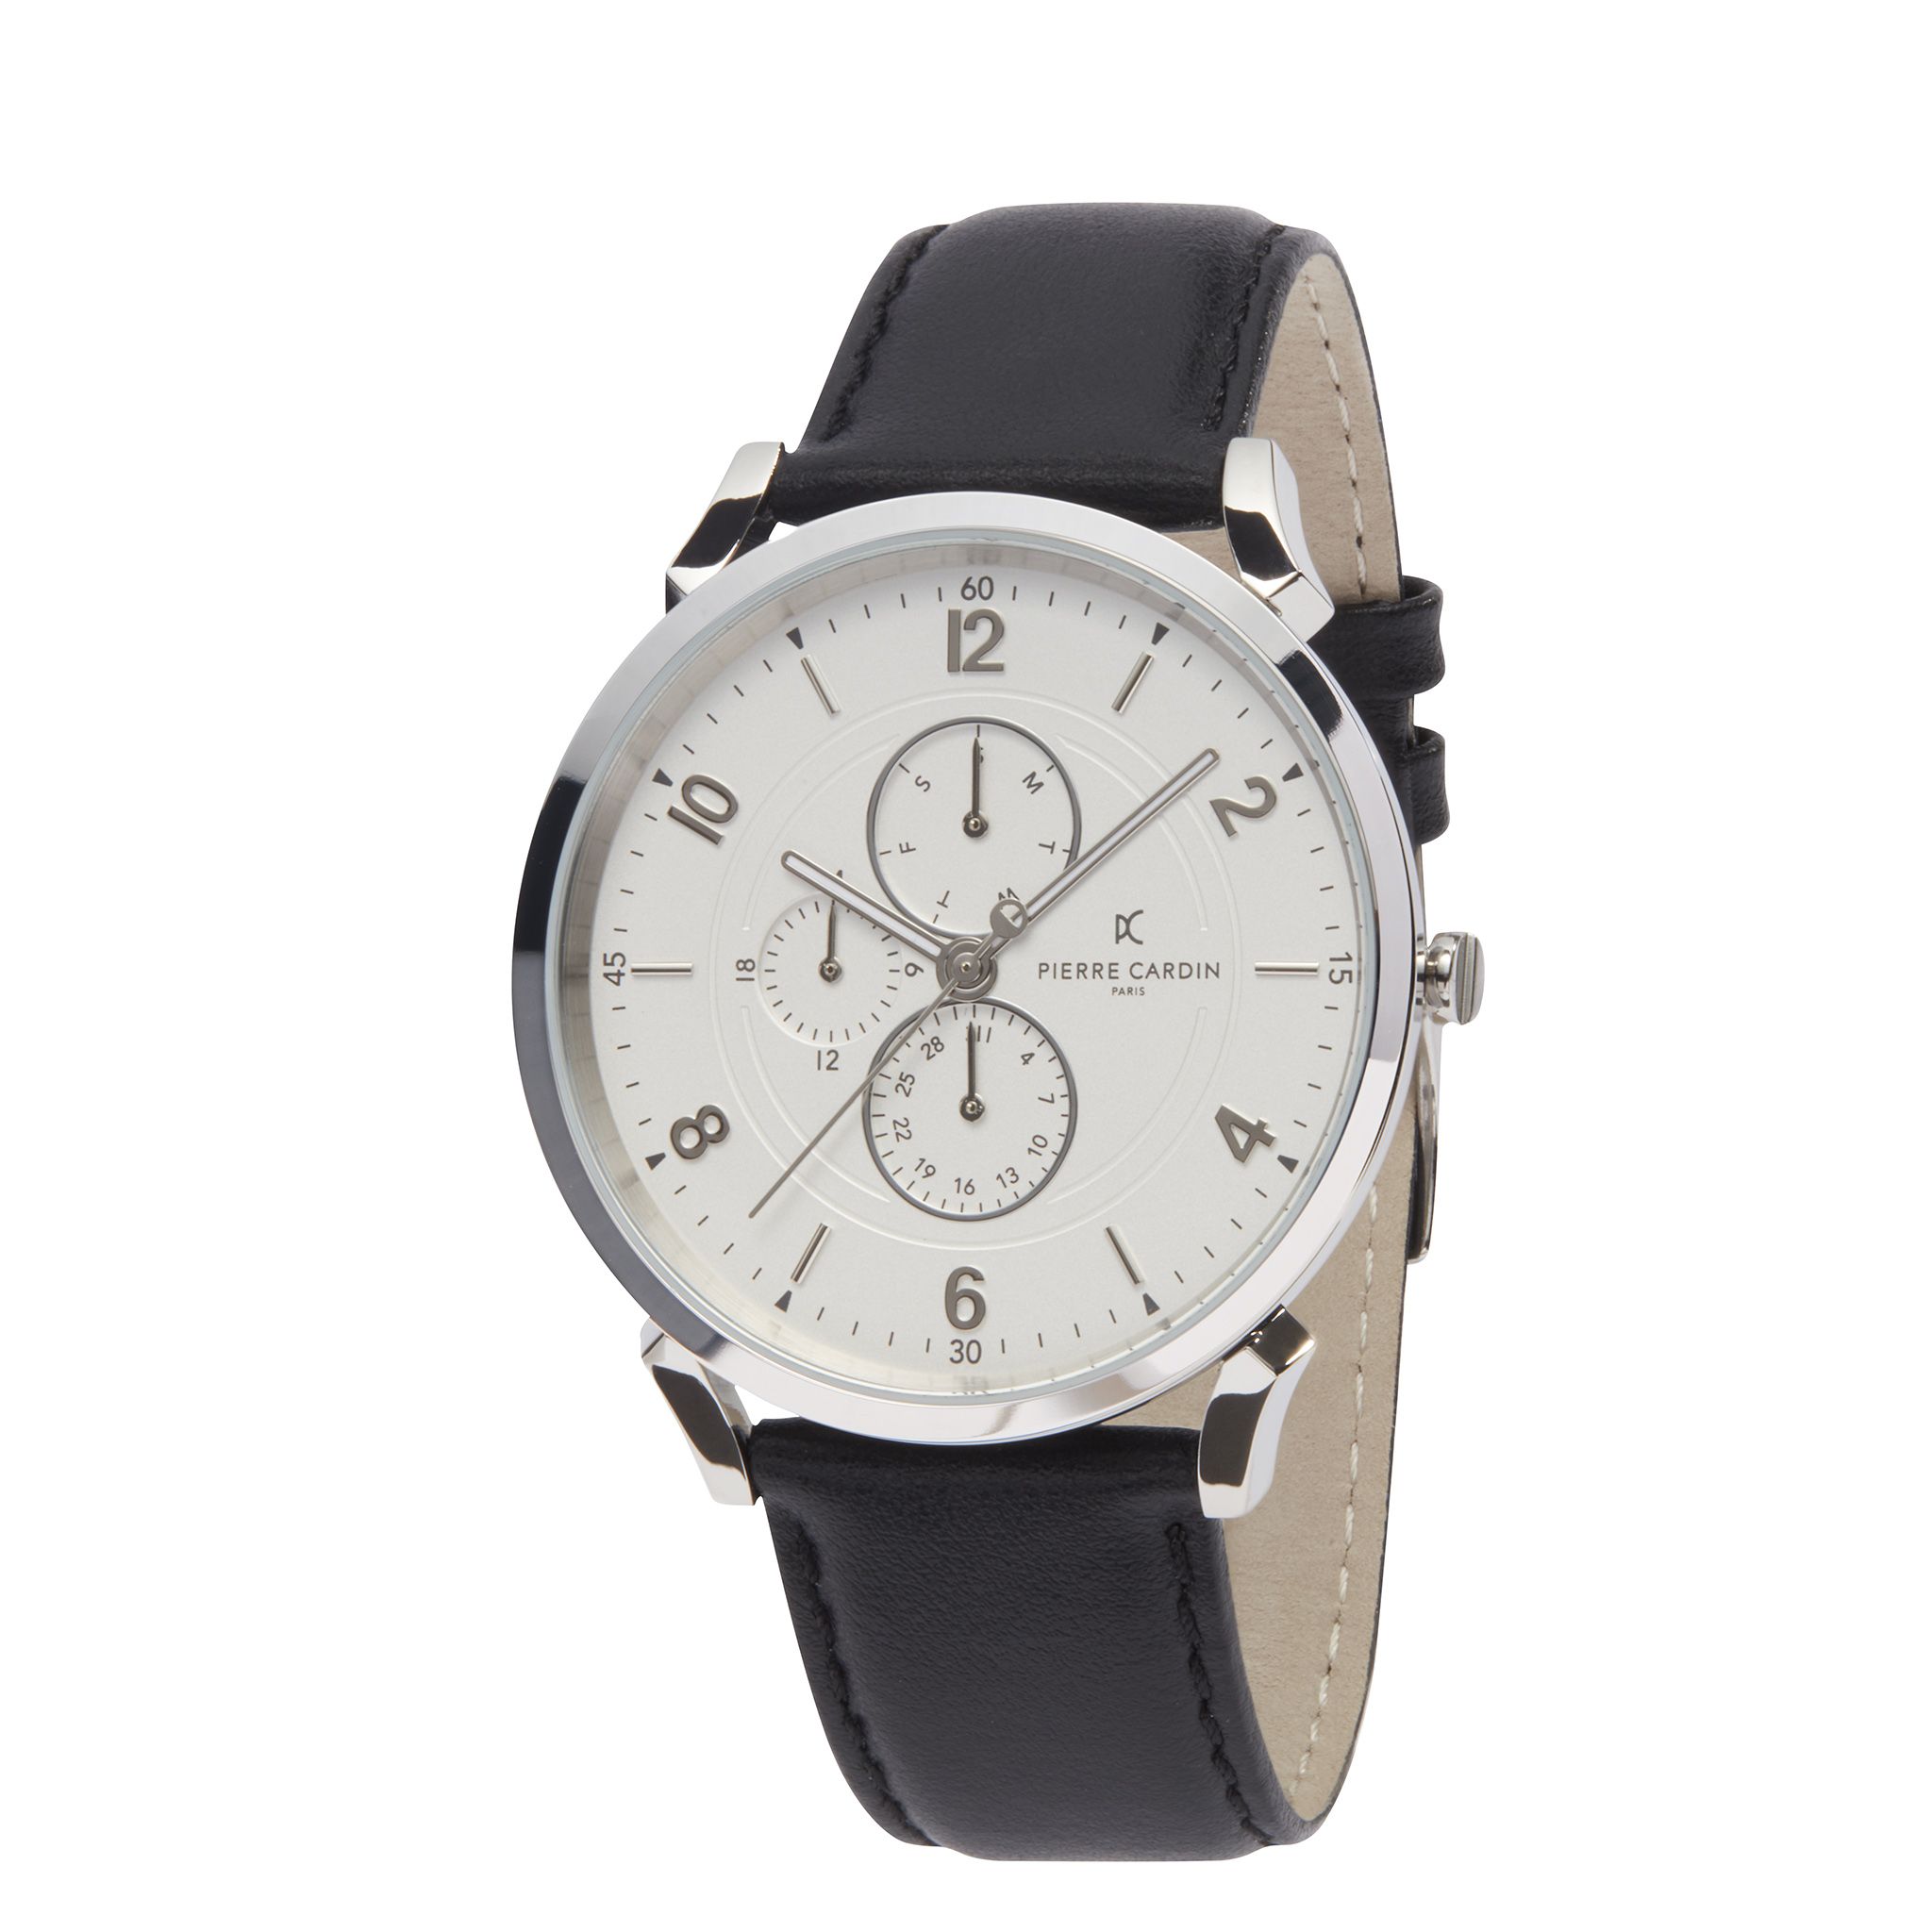 This Pierre Cardin Pigalle Boulevard Multi Dial Watch for Men is the perfect timepiece to wear or to gift. It's Silver 44 mm Round case combined with the comfortable Black Leather watch band will ensure you enjoy this stunning timepiece without any compromise. Operated by a high quality Quartz movement and water resistant to 3 bars, your watch will keep ticking. This sporty and clasical watch is perfect for every occasion! -The watch has a calendar function: Day-Date, Luminous Hands, 24-hour Display High quality 21 cm length and  21 mm width Black Leather strap with a Buckle Case diameter: 44 mm,case thickness: 8 mm, case colour: Silver and dial colour: White